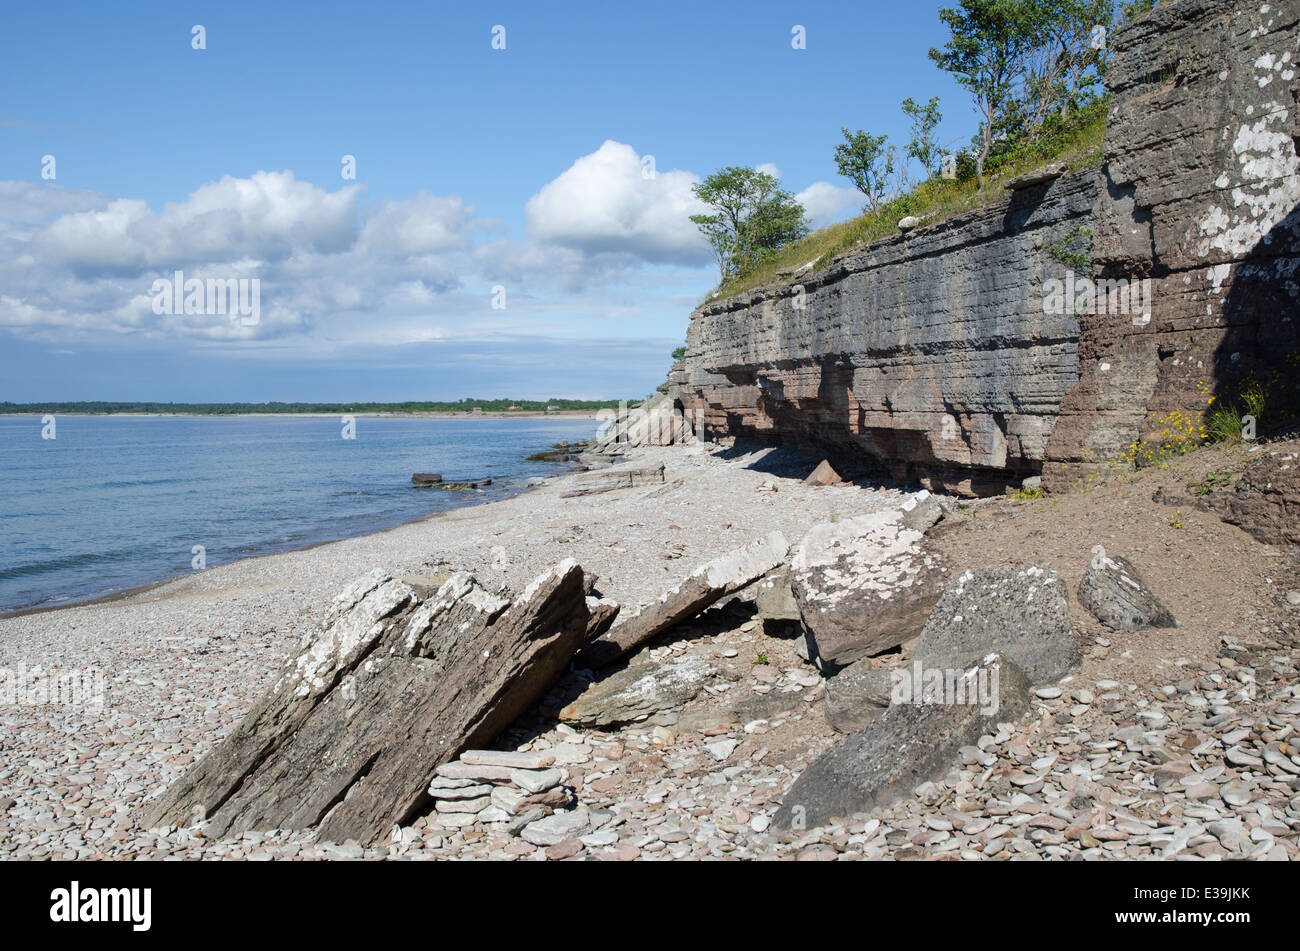 Cliffs by the coast at a calm bay at the swedish island Oland Stock Photo